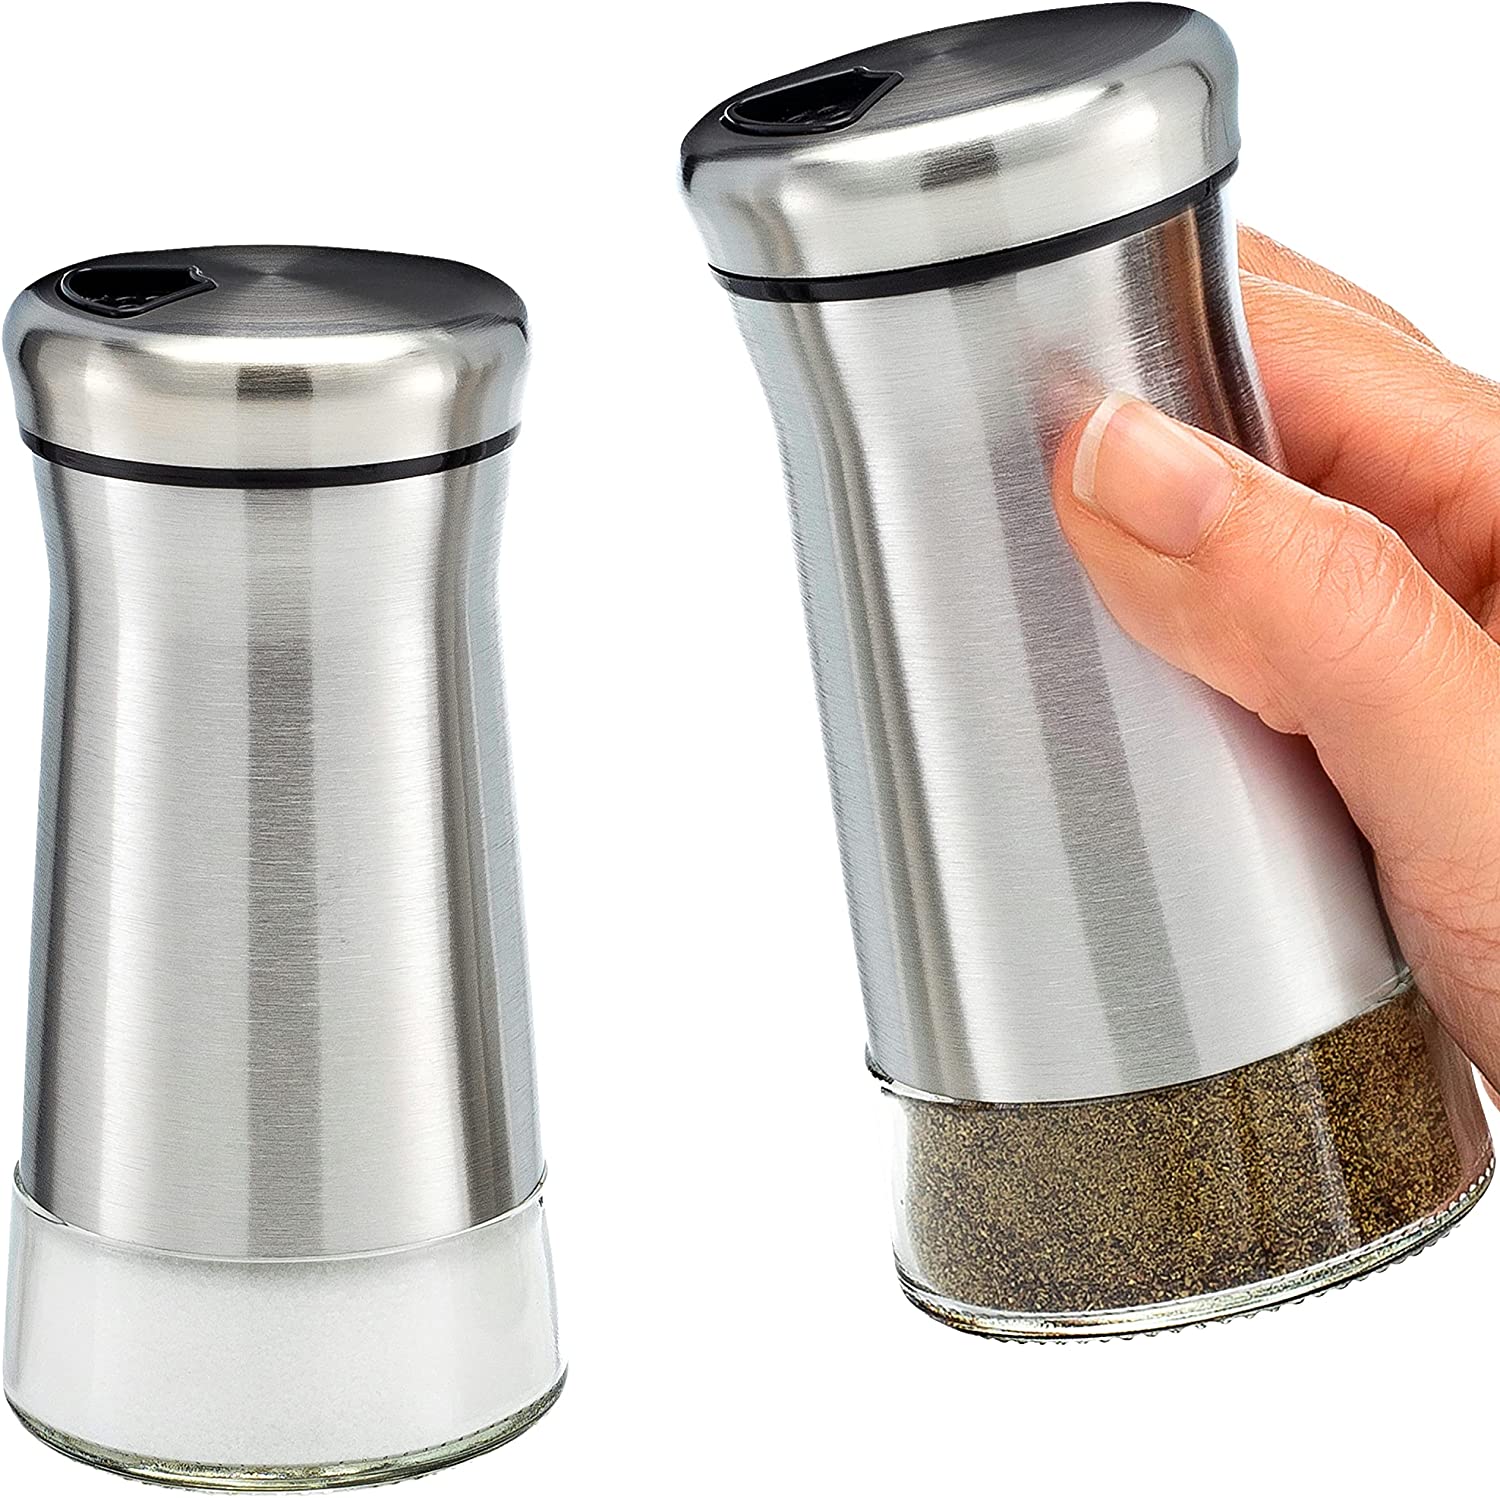 Juvale Stainless Steel Salt and Pepper Shakers Set with Holder, Refillable,  Clear Glass Bottoms, Screw-Off Perforated S and P Caps for Kitchen Table  Decor (4oz) 